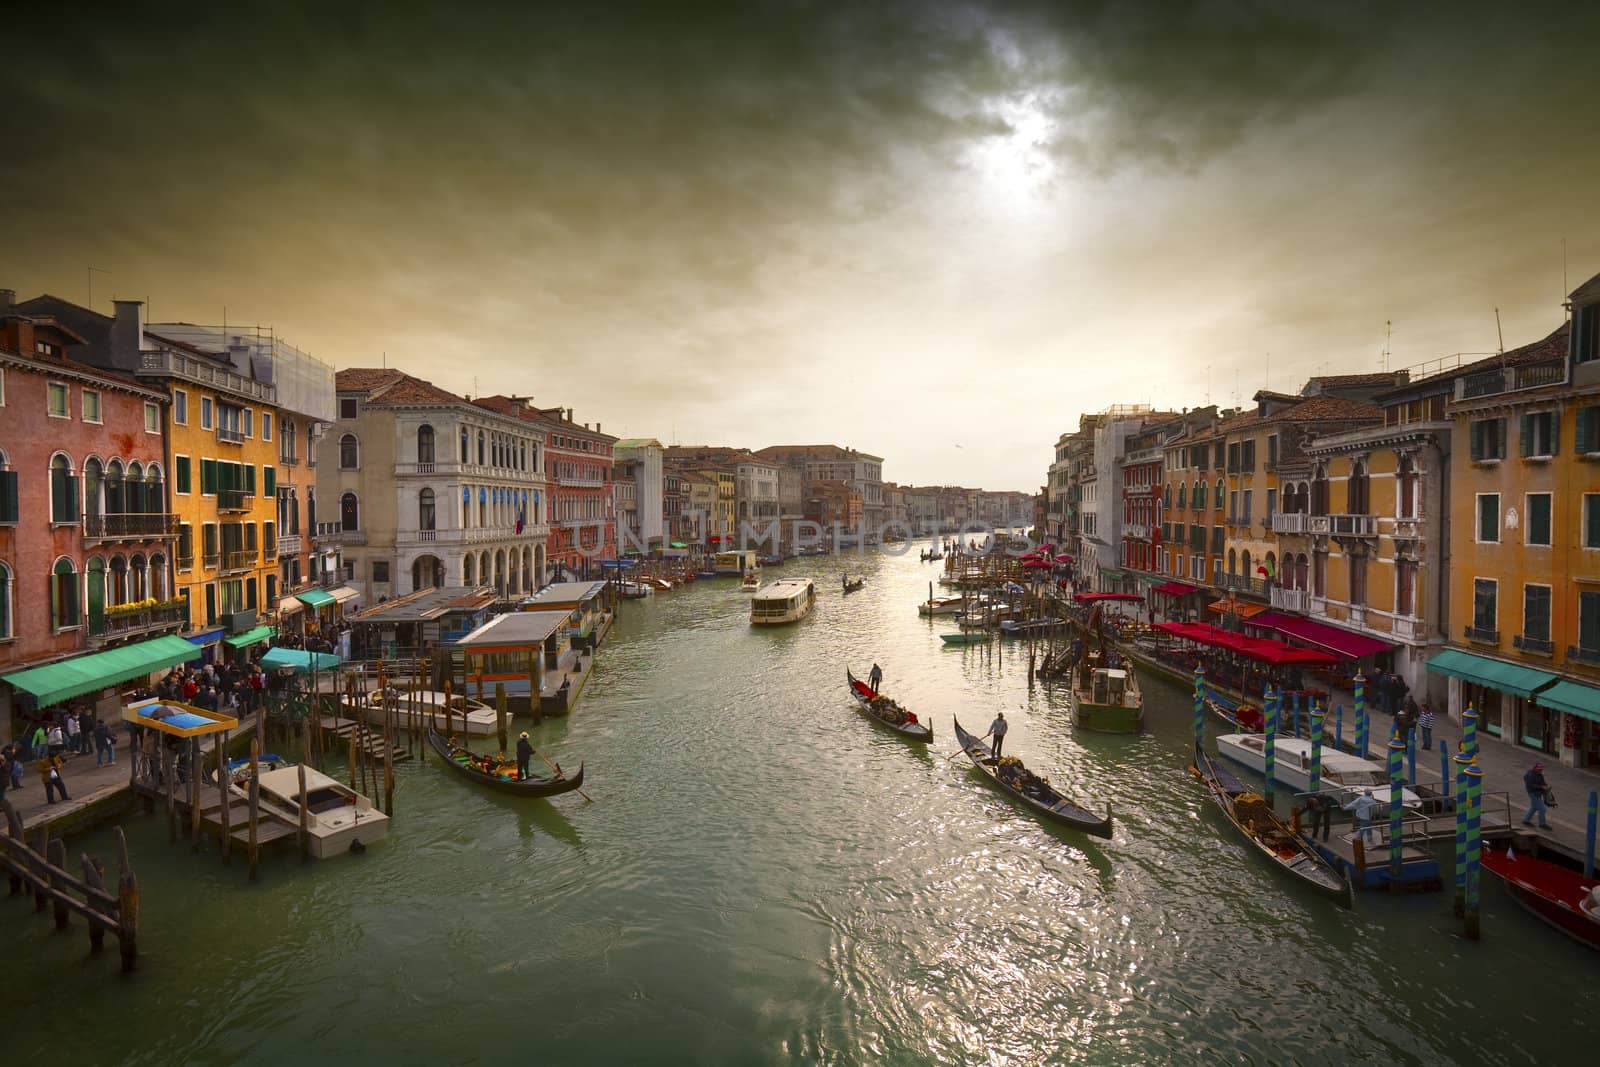 Boats and gondolas on the Grand Canal of Venice, Italy.